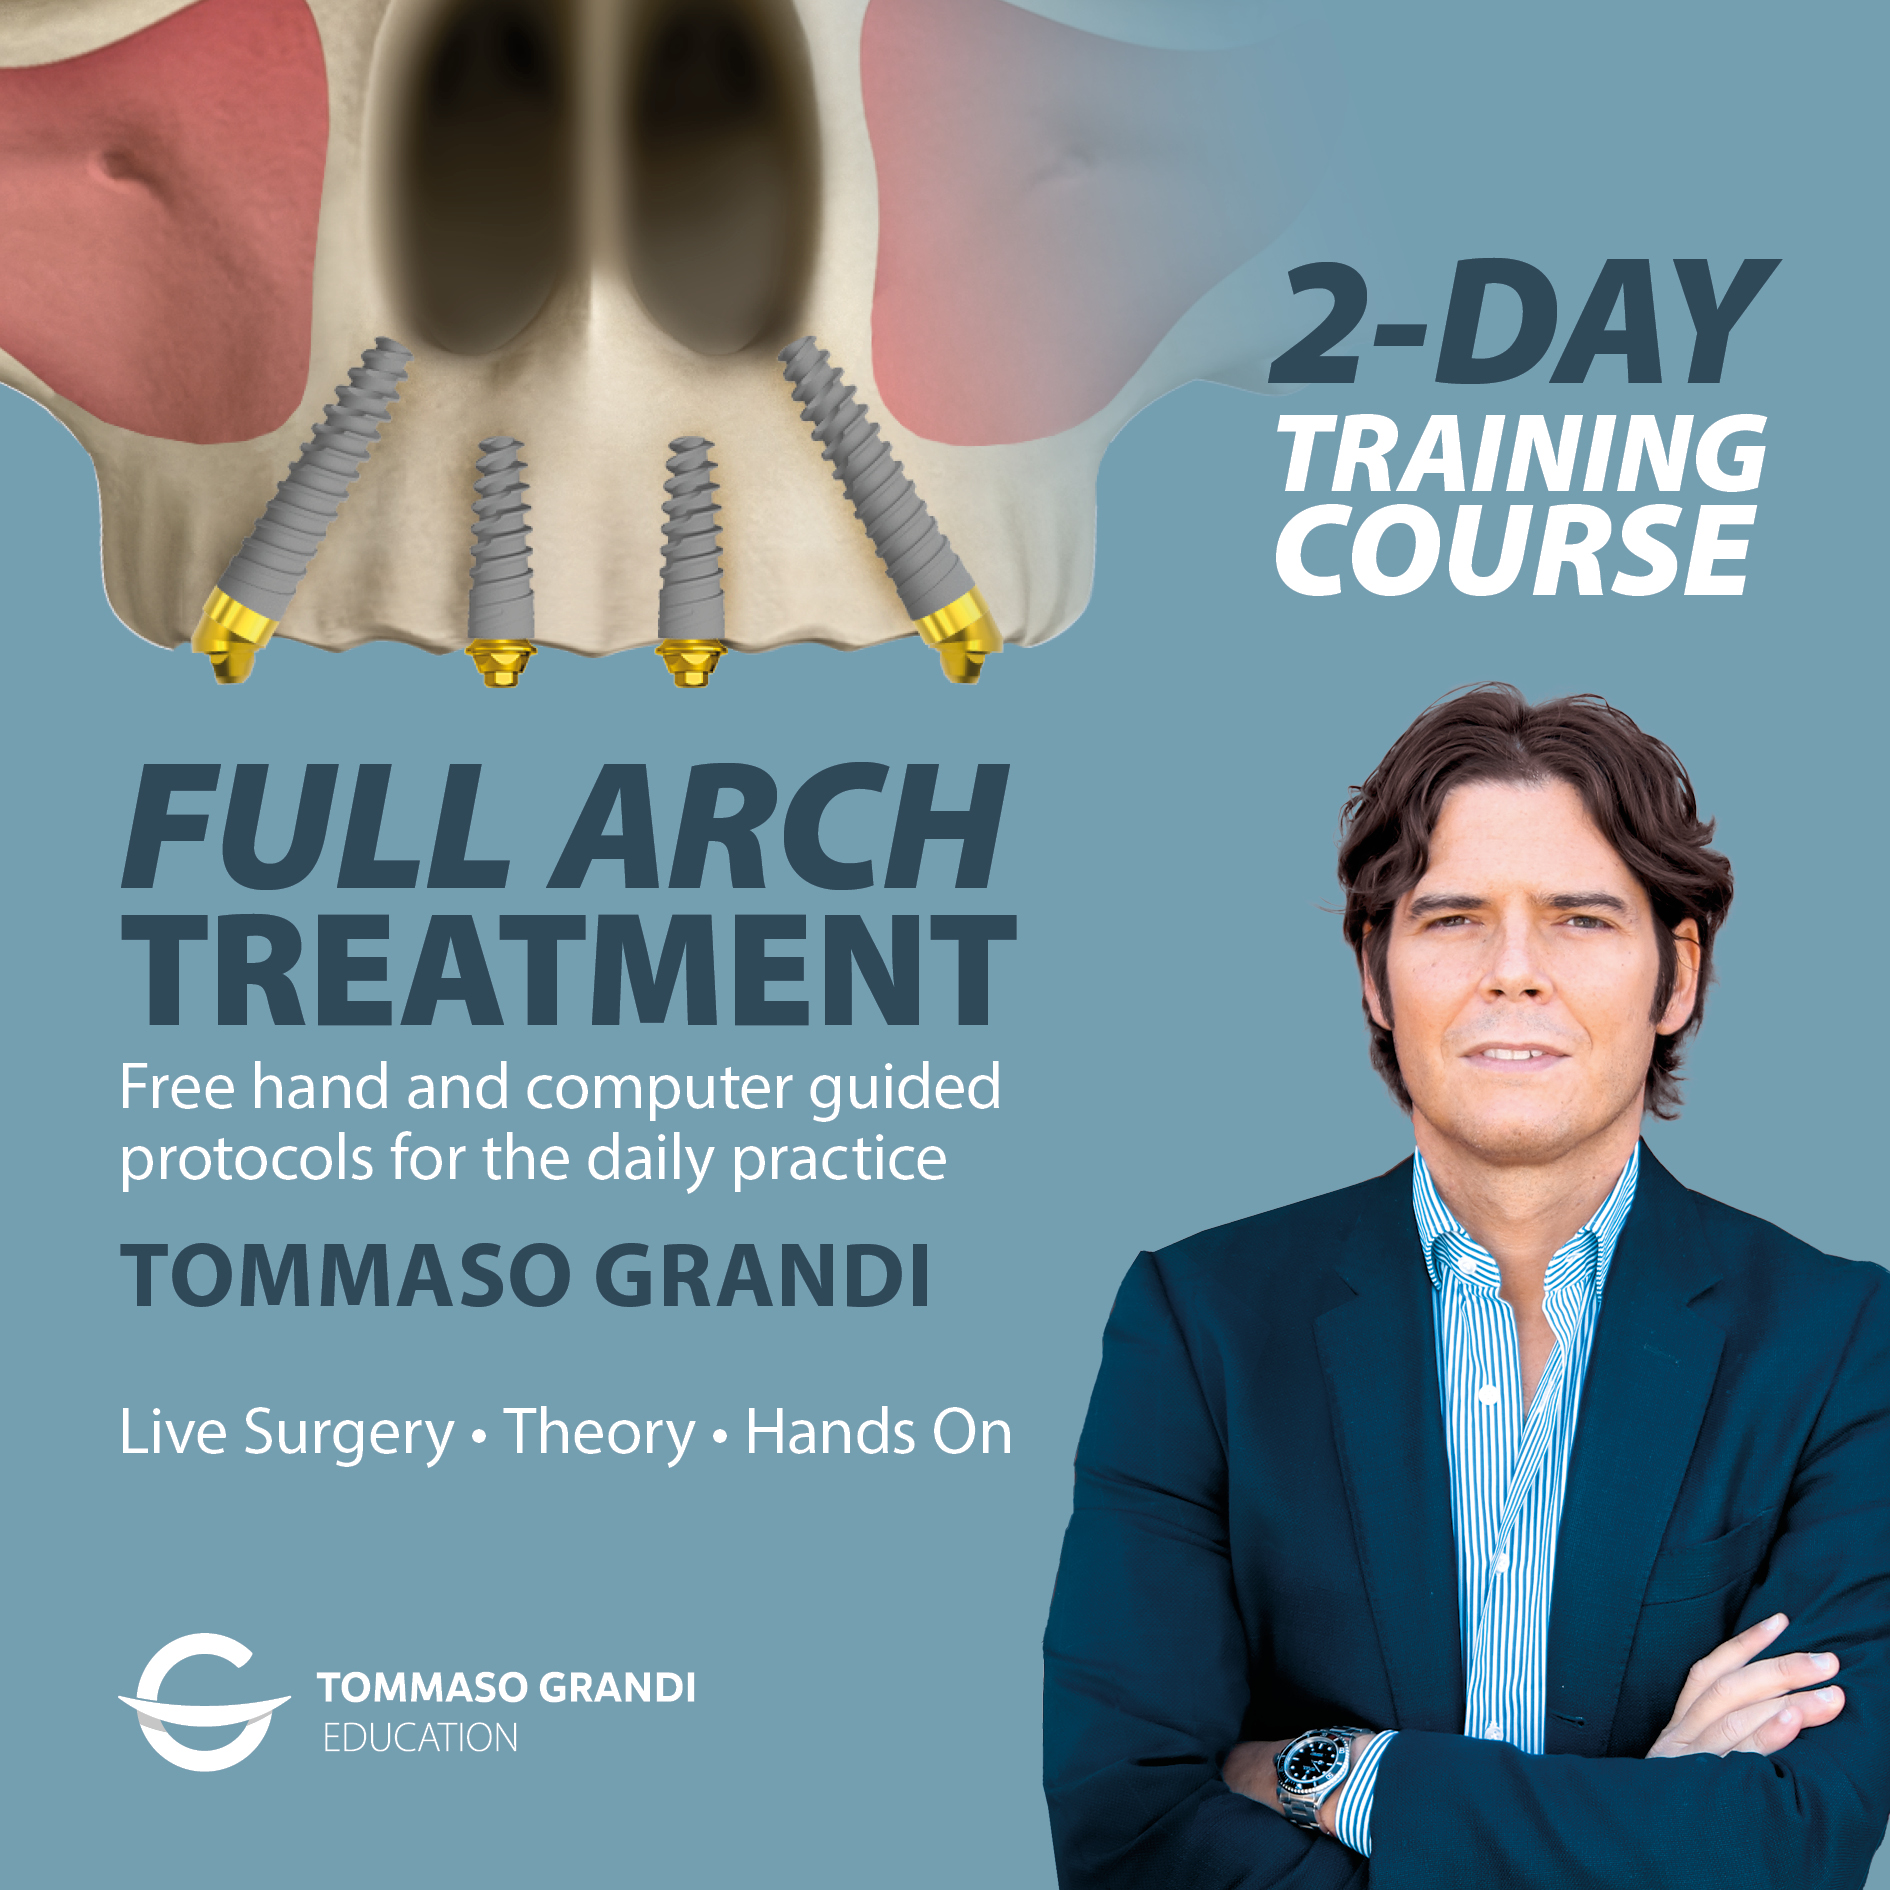 2-day clinical residency course “Full Arch Treatment”